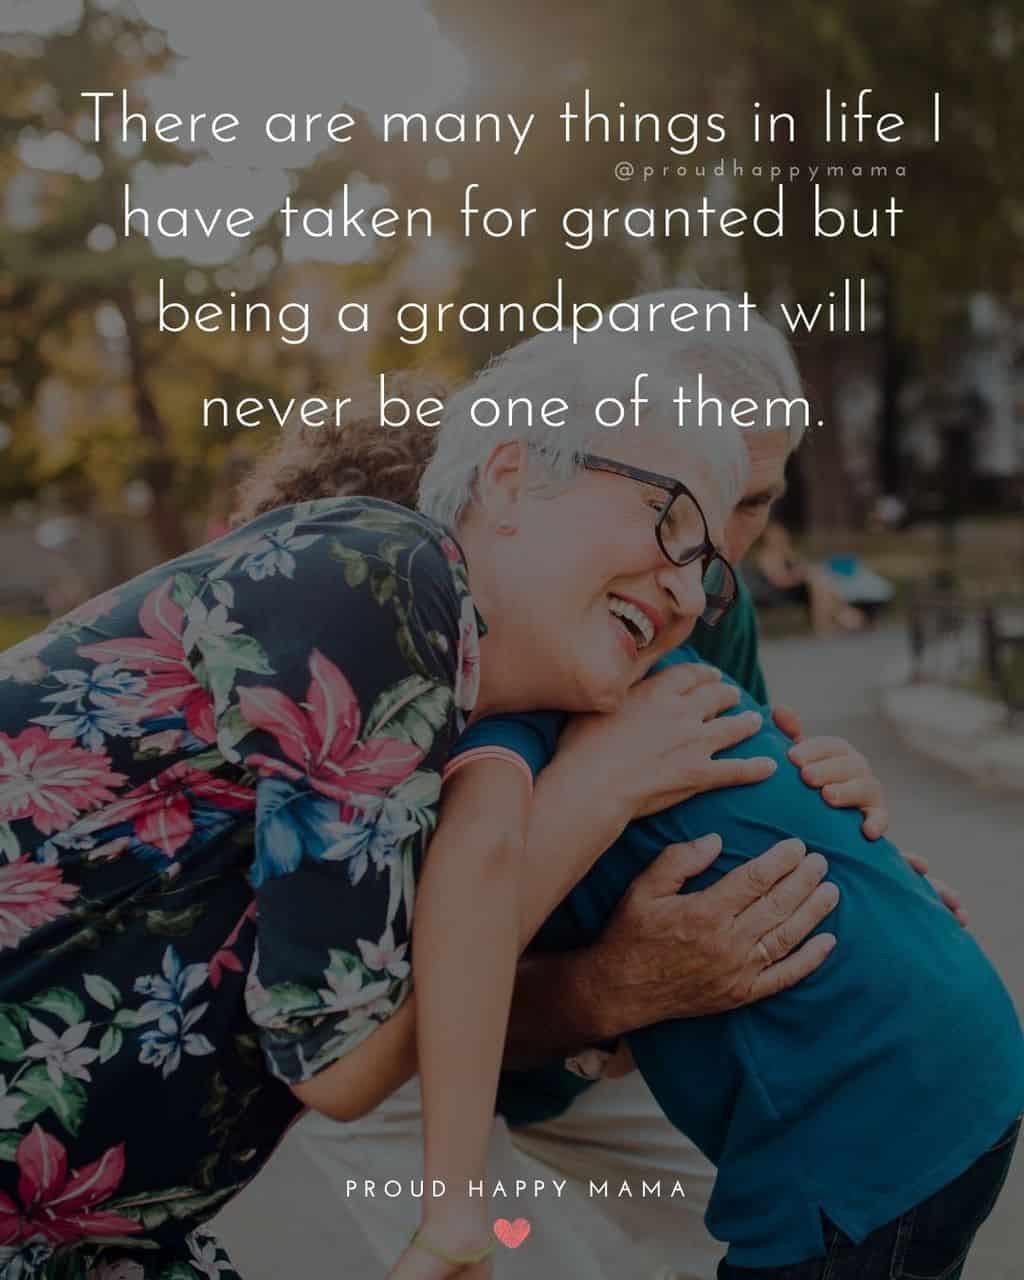 Grandparent Quotes – There are many things in life I have taken for granted but being a grandparent will never be one of them.